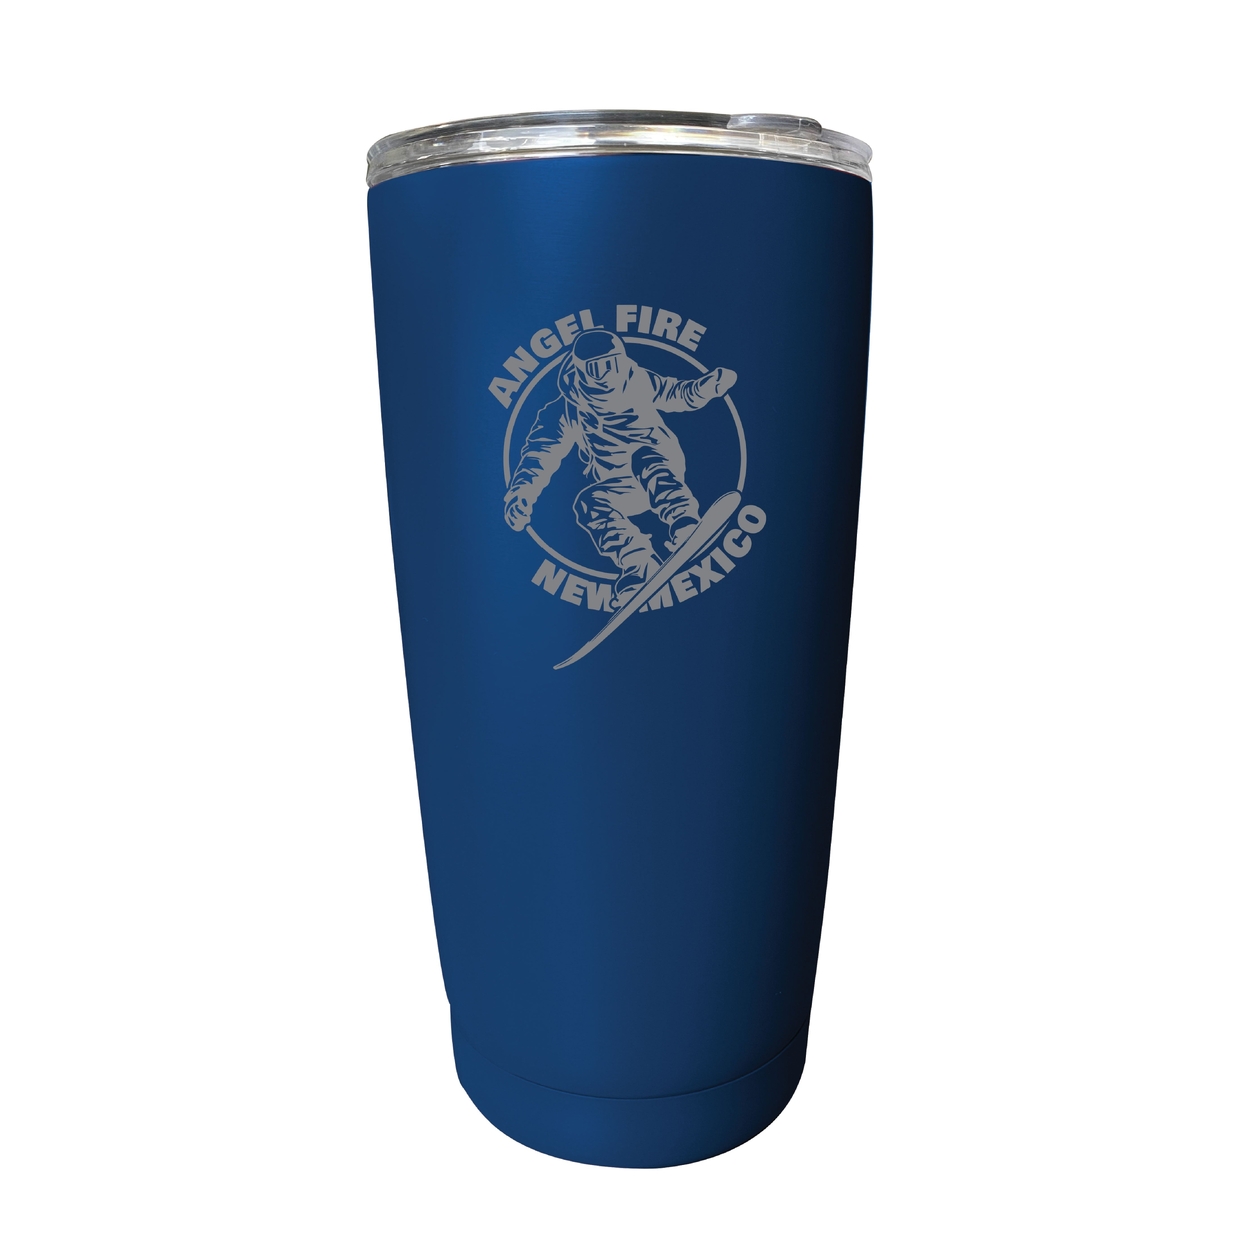 Angel Fire New Mexico Souvenir 16 Oz Engraved Stainless Steel Insulated Tumbler - Navy,,Single Unit